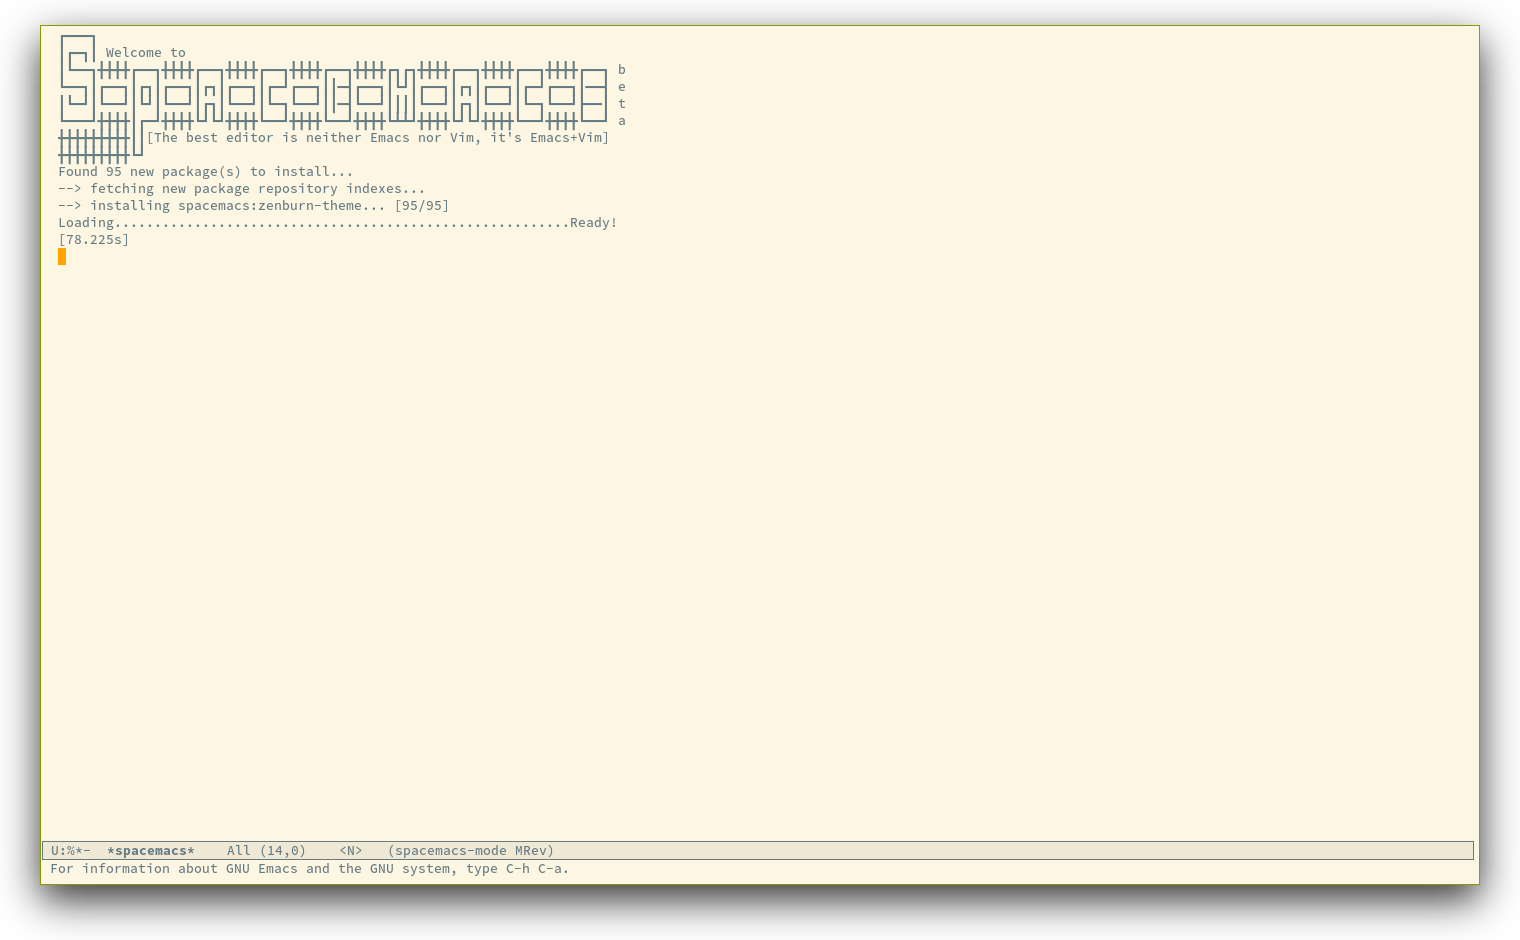 /TakeV/spacemacs/media/commit/a358eb01540f24f9827050d1bf779455864091ef/doc/img/spacemacs-startup.png